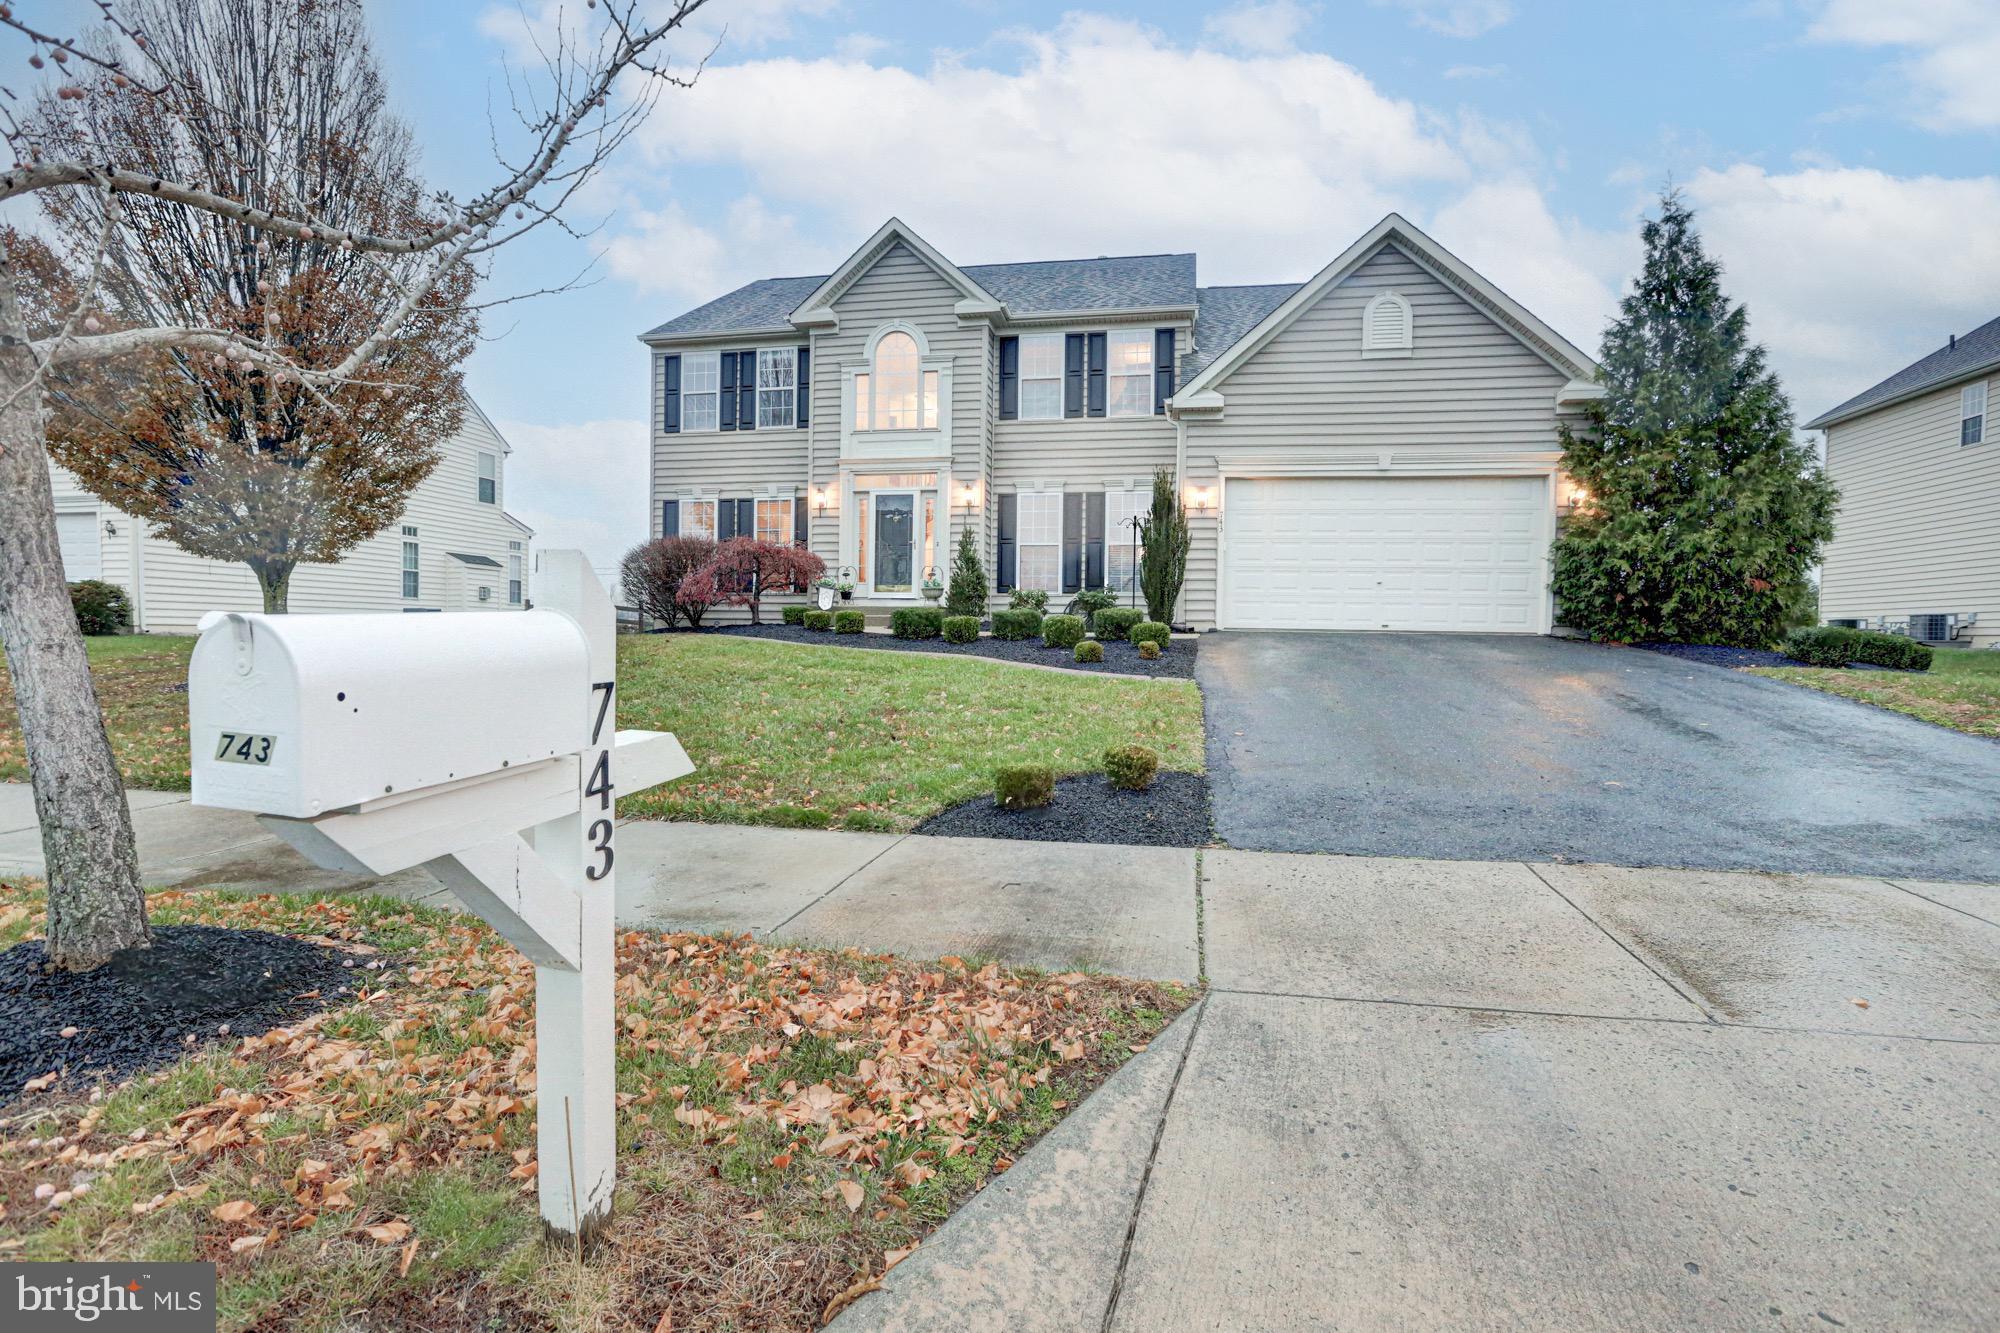 Come home for the holidays to 743 Wood Duck Court in the desirable neighborhood of Dove Run in Middl